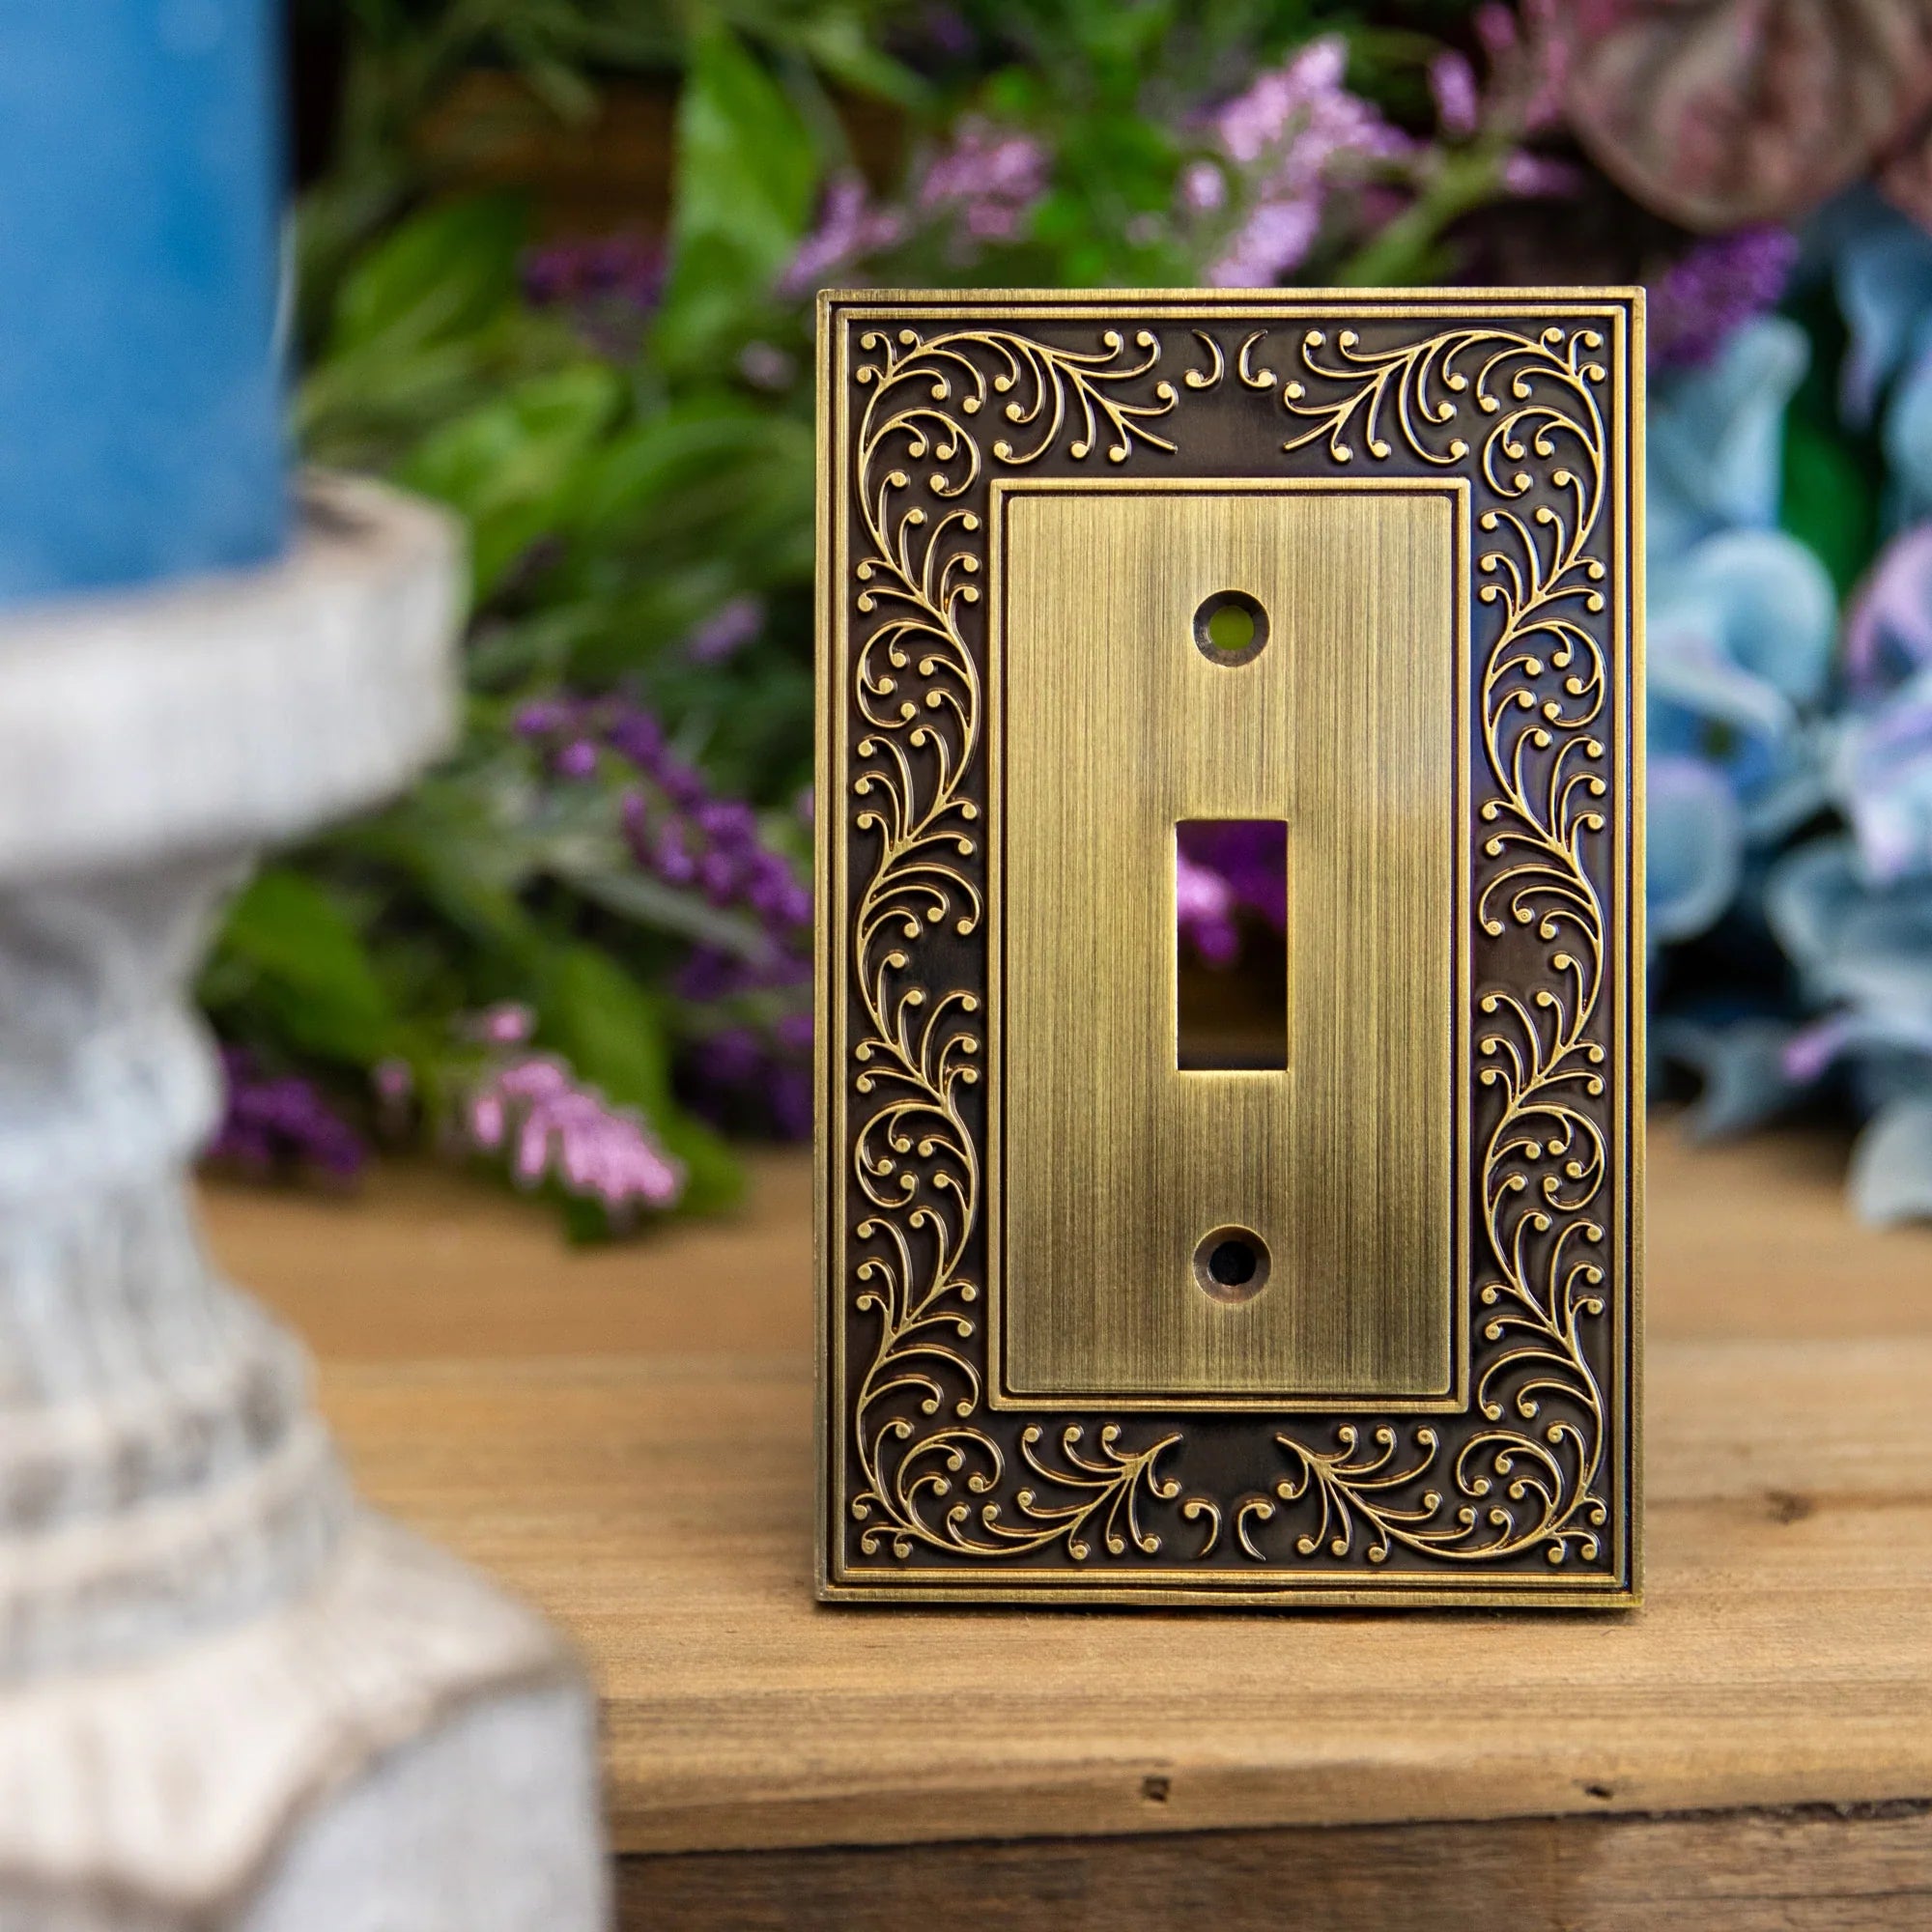 English Garden Brushed Brass Cast - 1 Cable Jack Wallplate